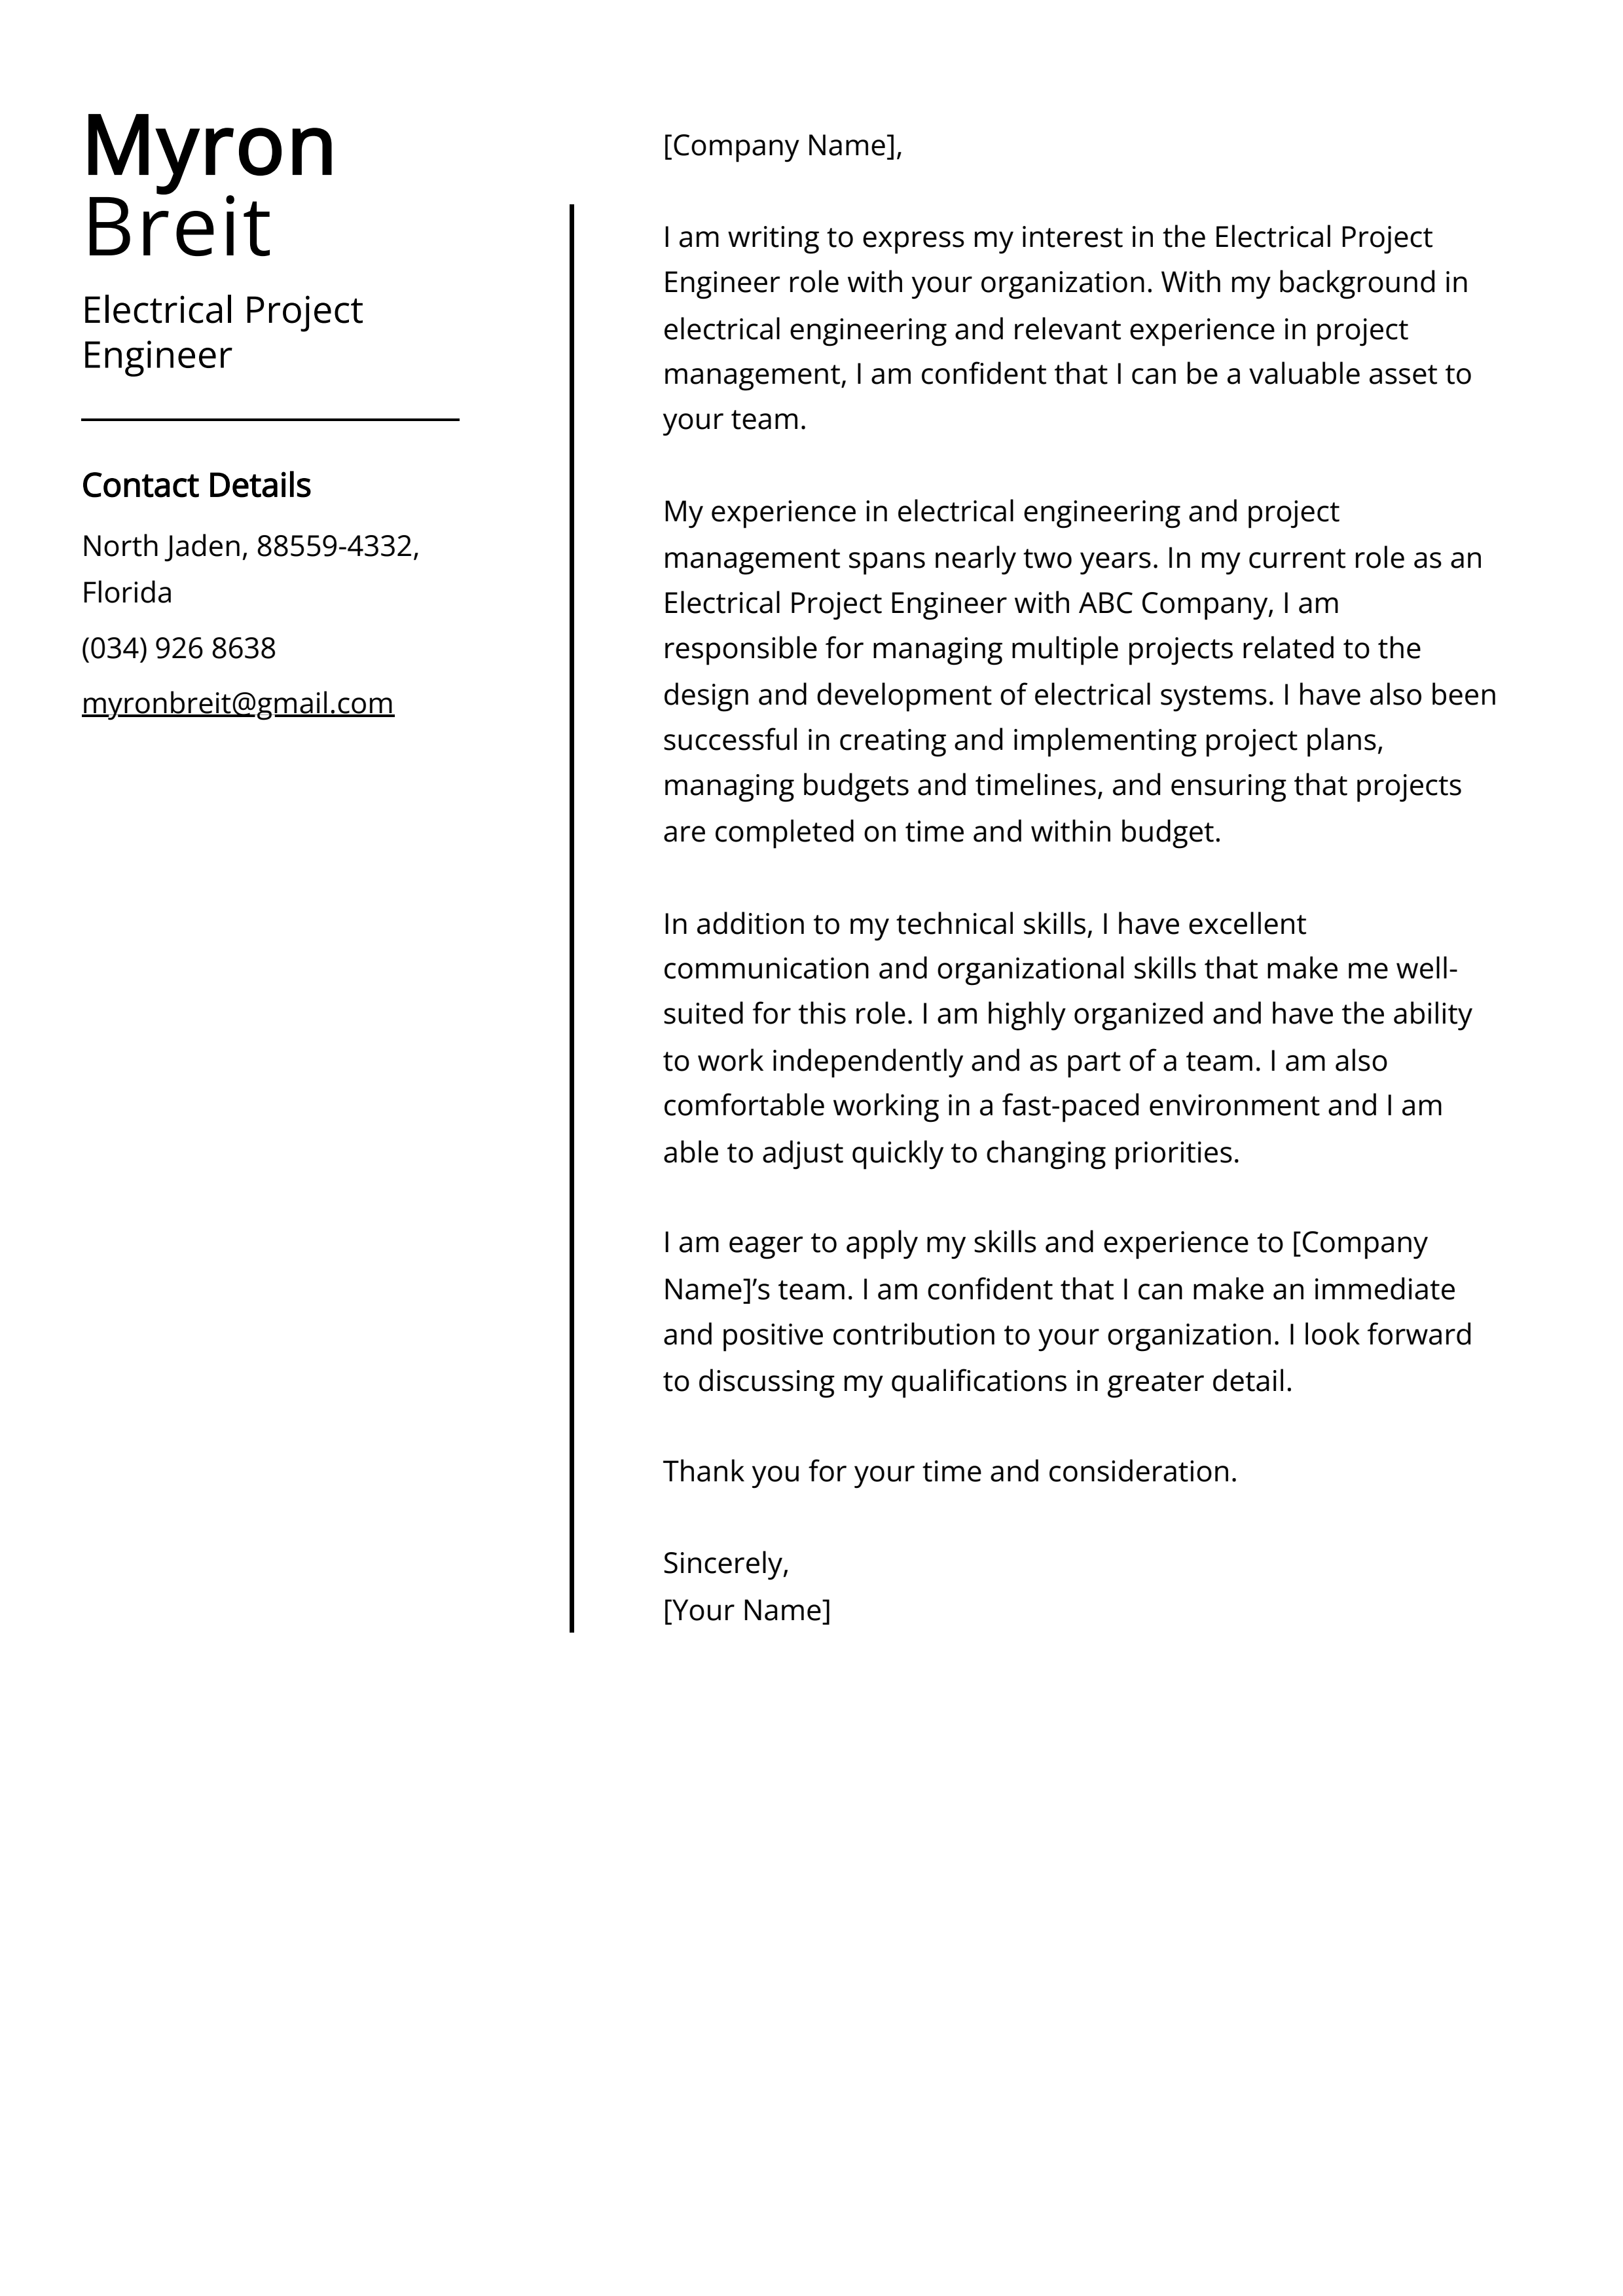 Electrical Project Engineer Cover Letter Example